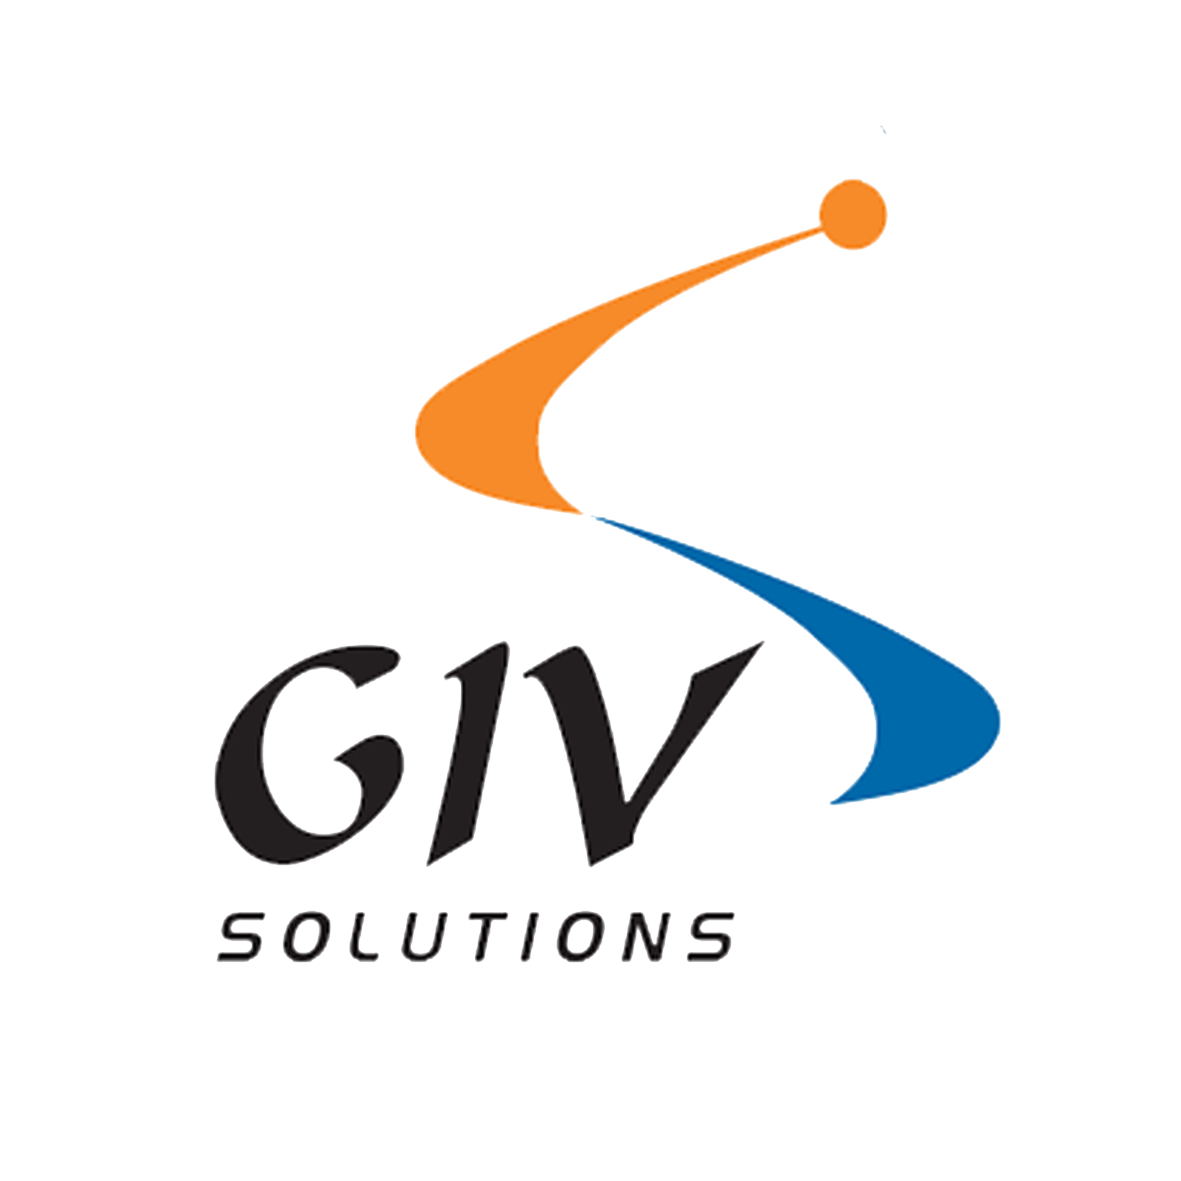 GIV Solutions